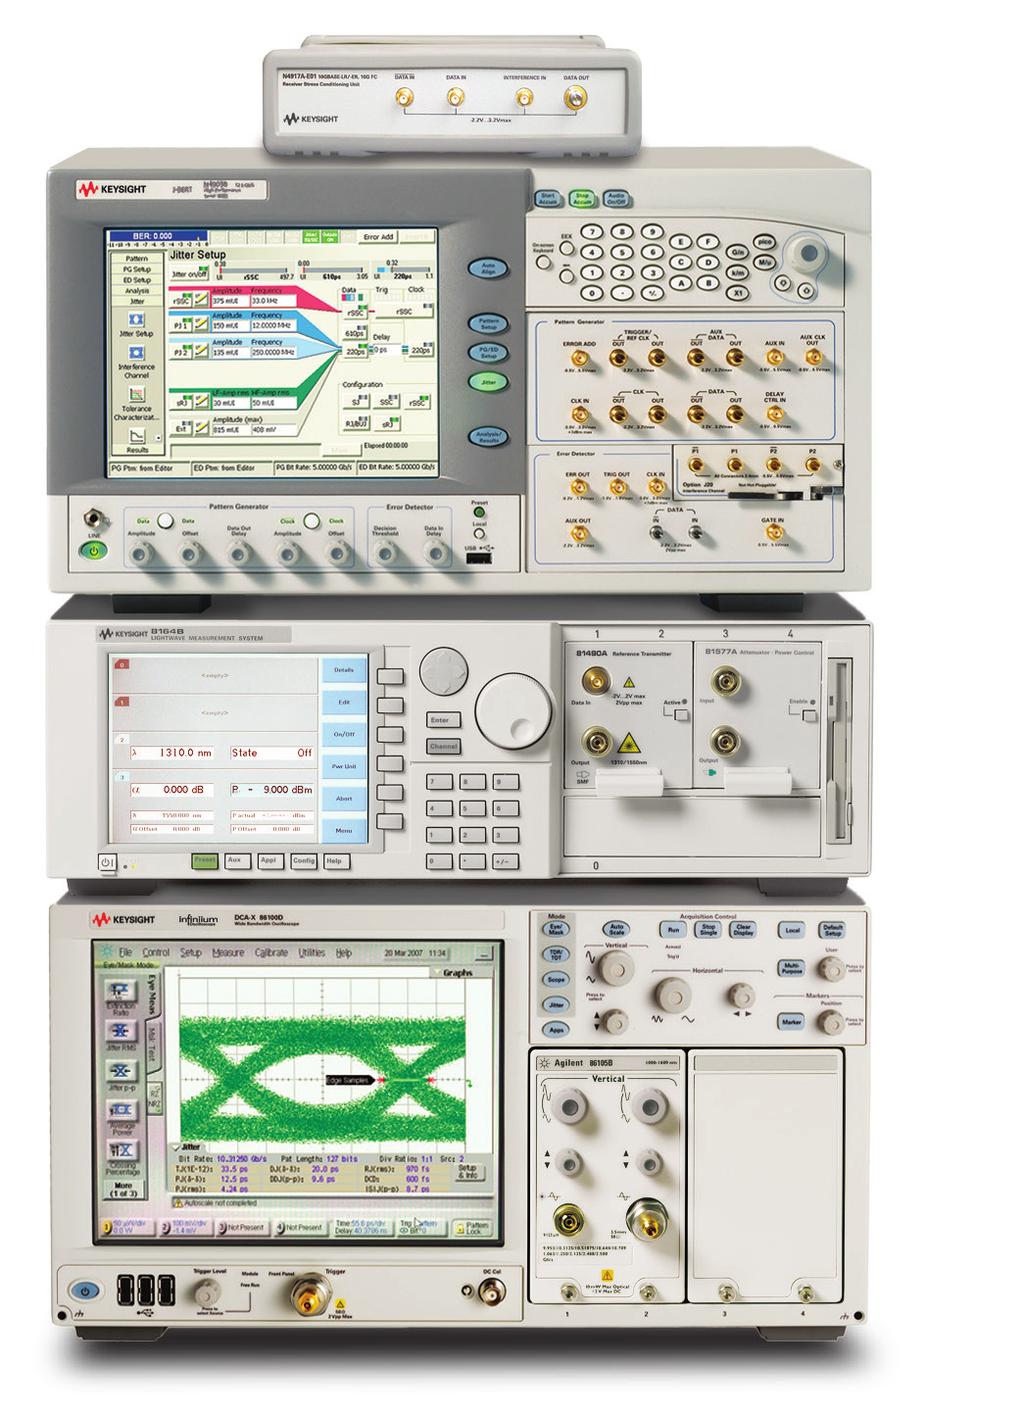 2 Keysight M9037A PXIe Embedded Controller - Data Sheet Repeatable optical receiver stress tests according to 10GbE IEEE 802.